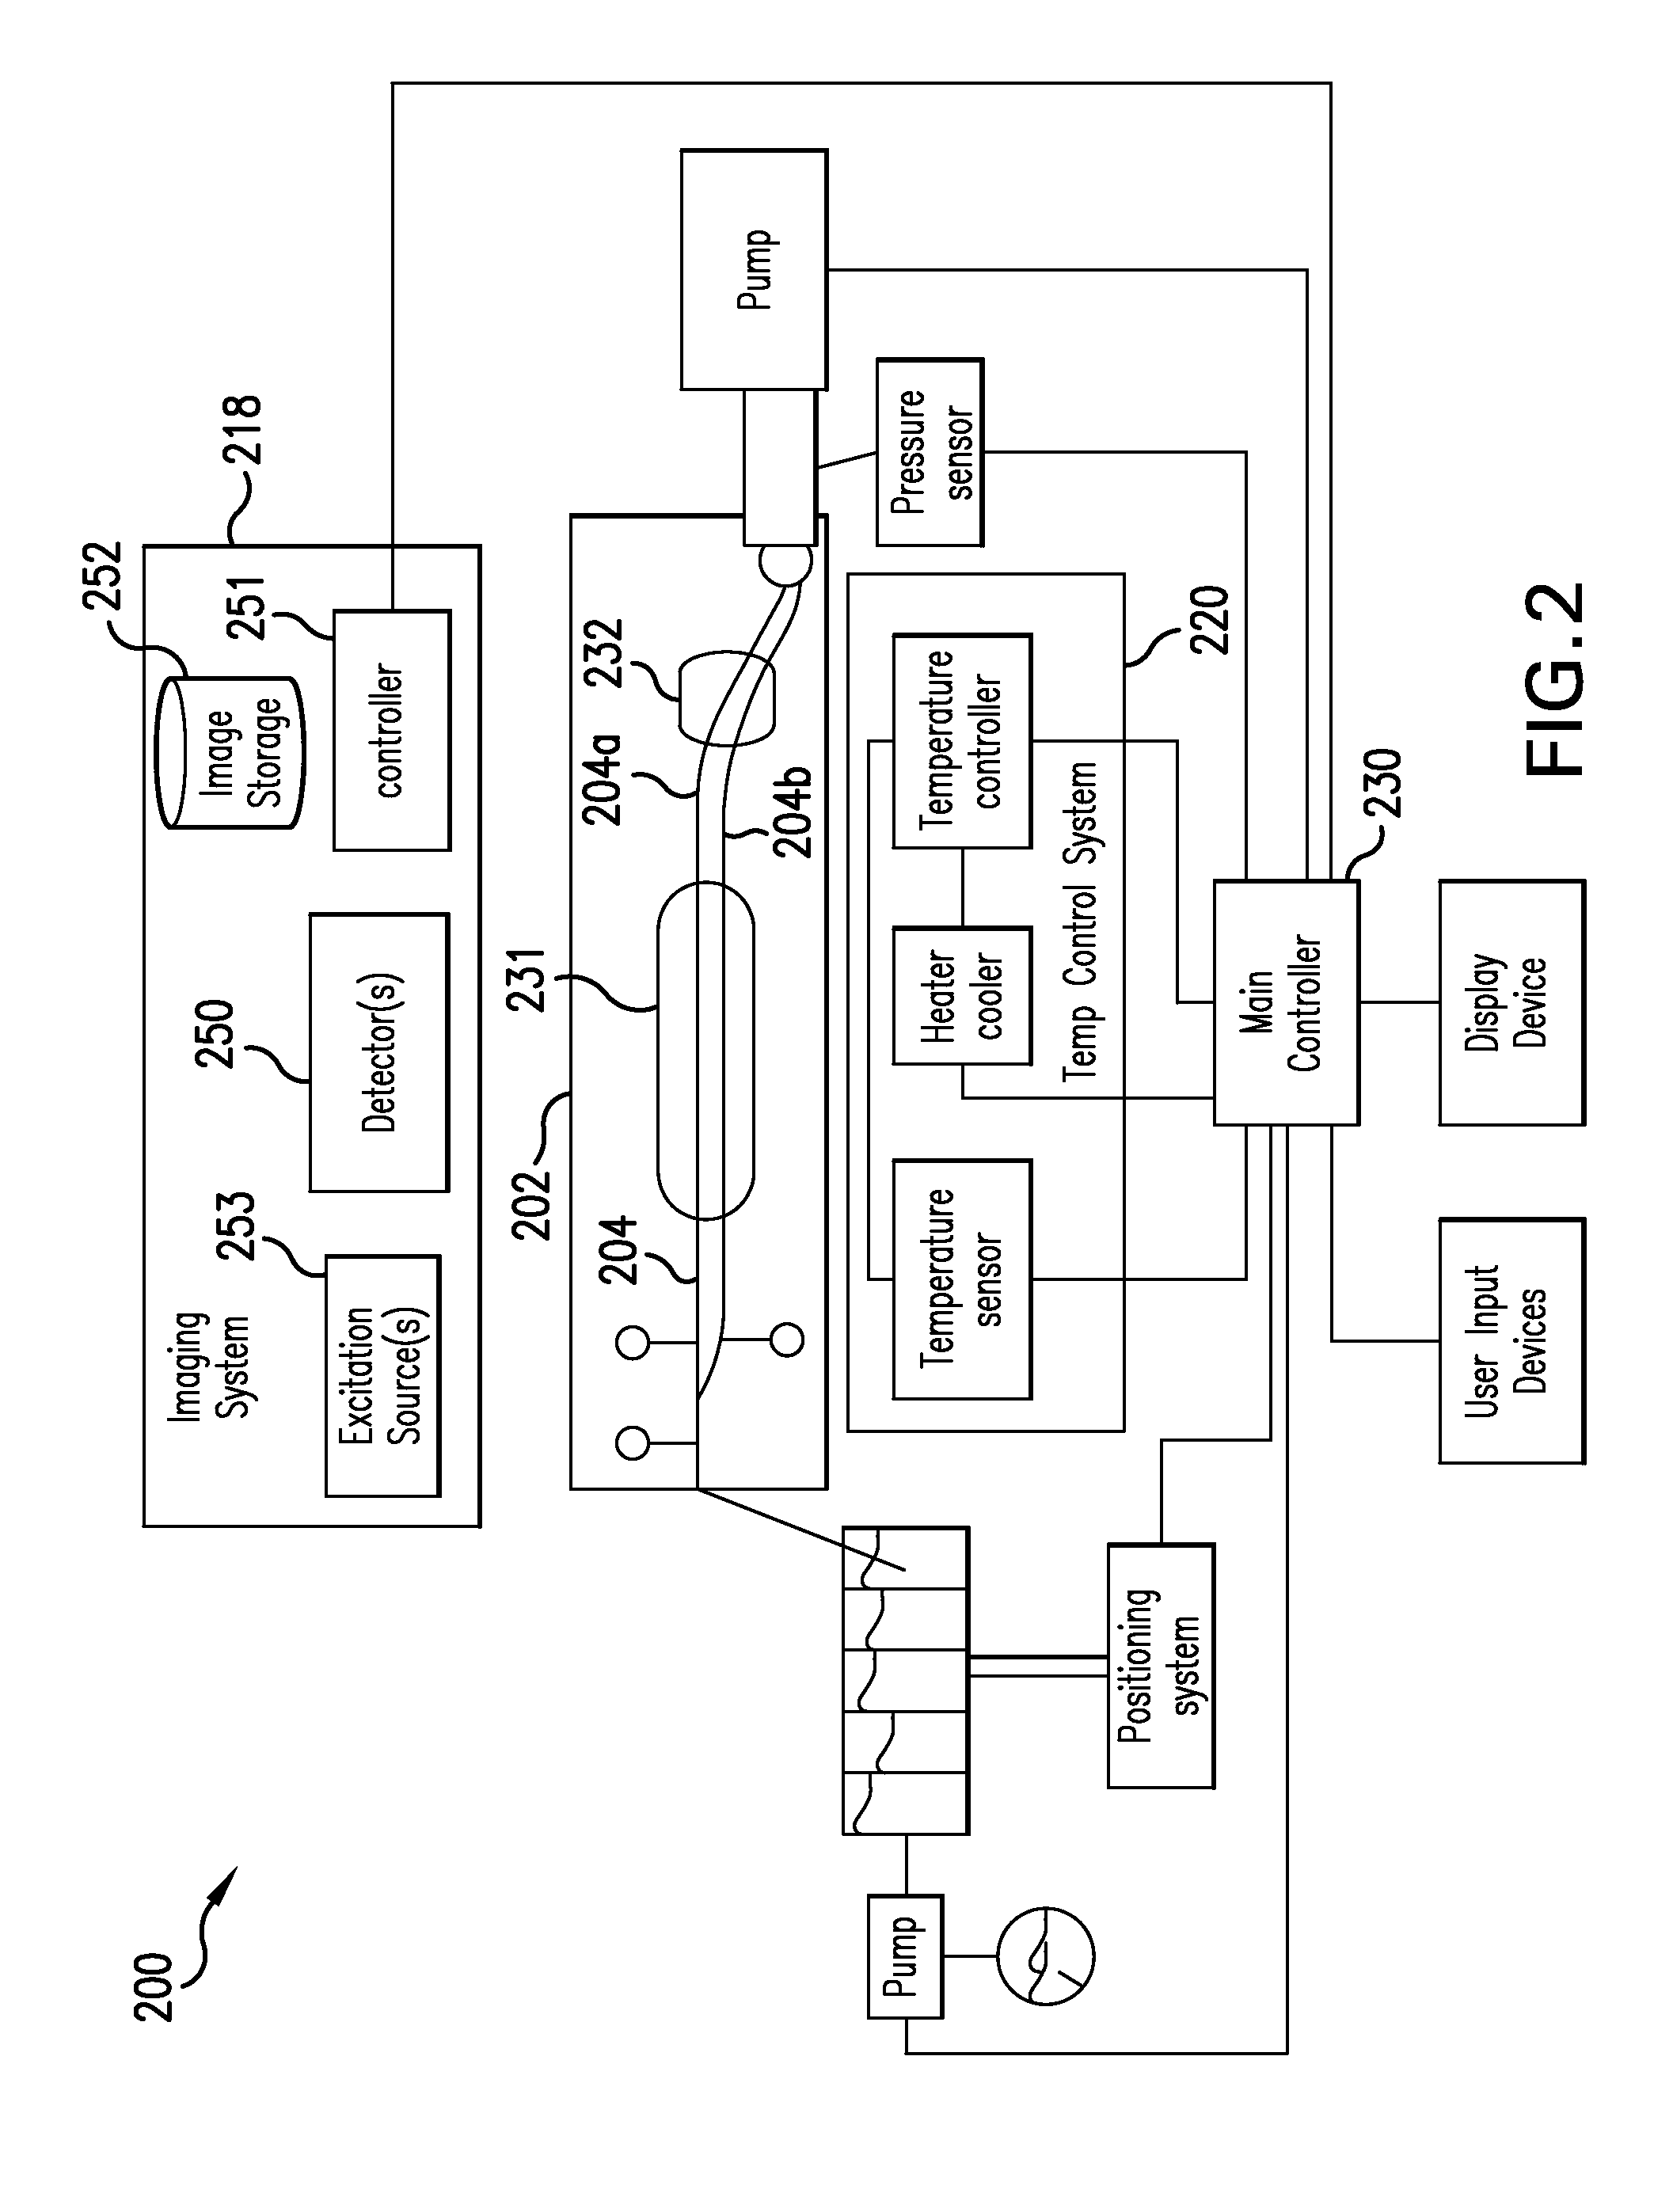 Systems and methods for monitoring the amplification of DNA